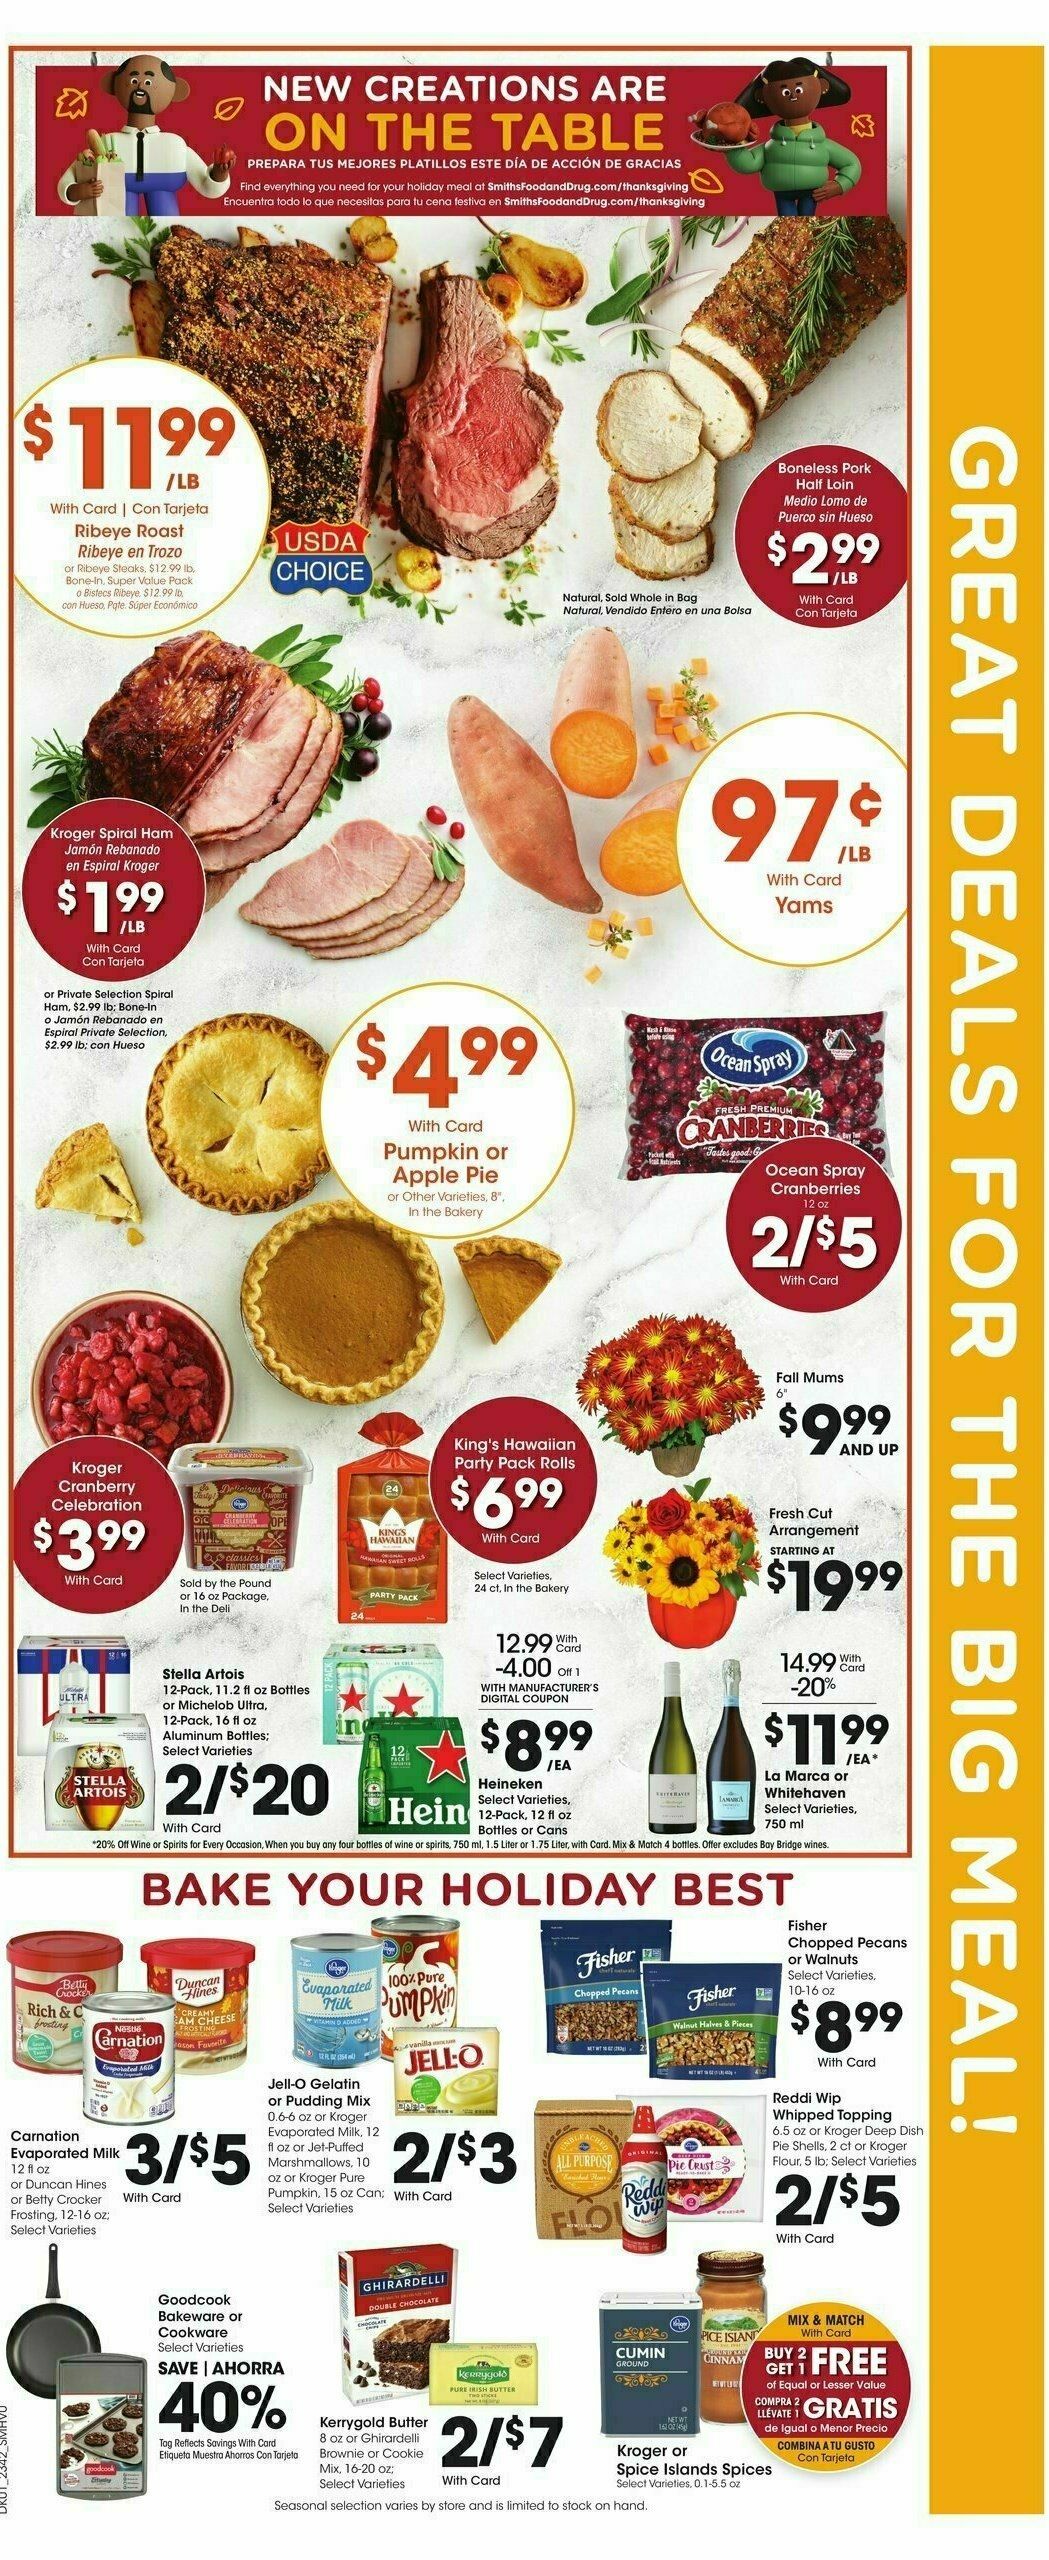 Smith's Weekly Ad from November 15